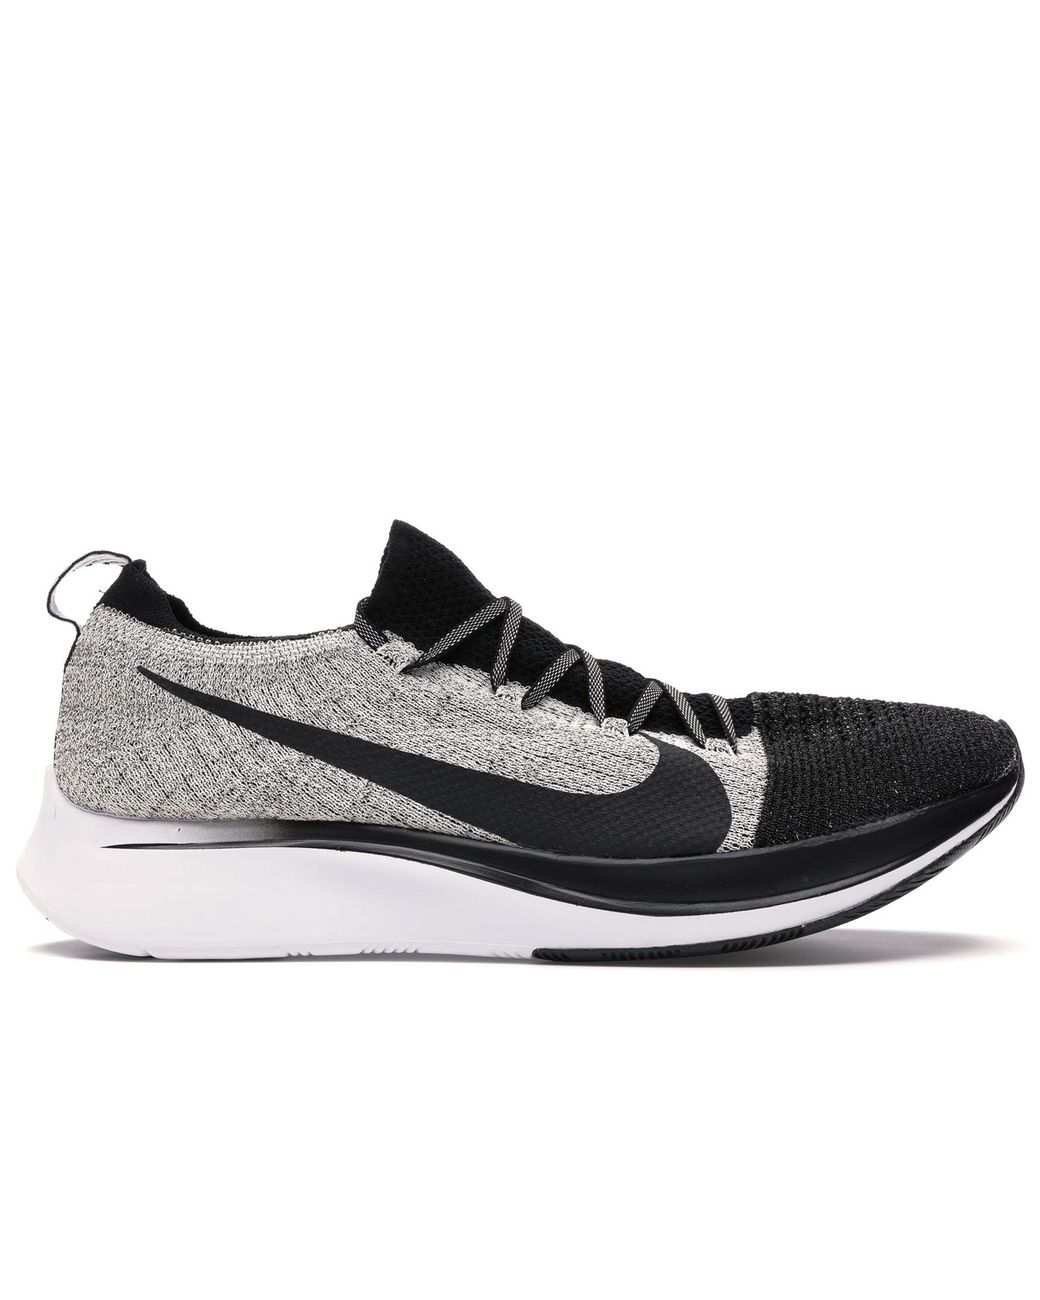 Nike Zoom Fly Flyknit Shoes - Size 13 